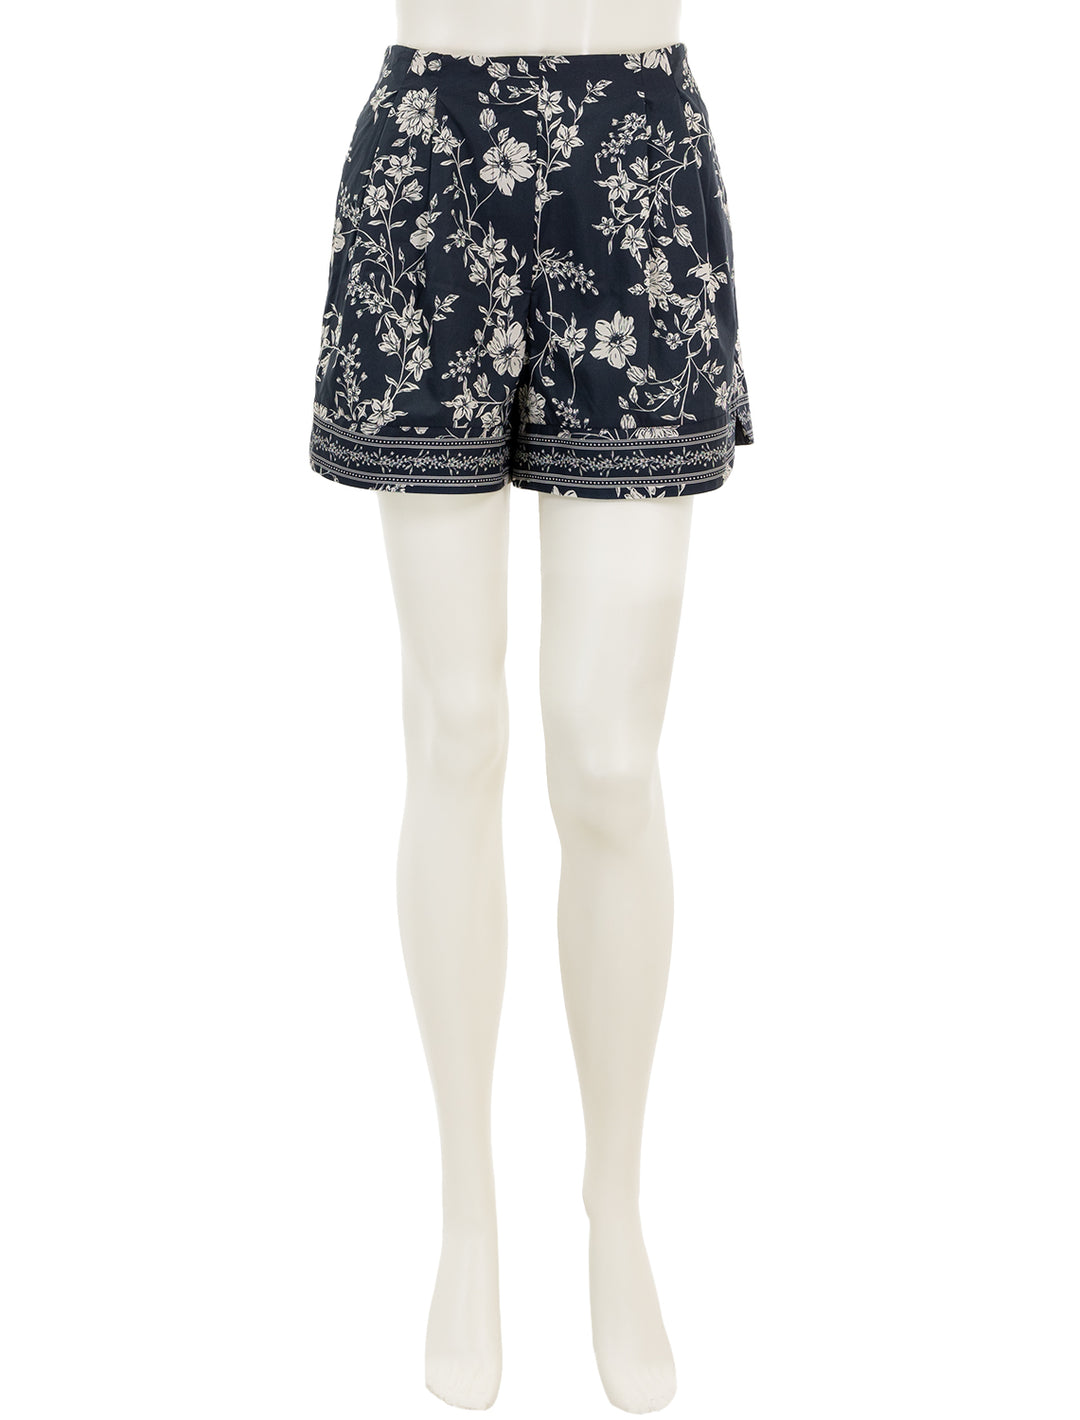 Front view of Cara Cara's trish shorts in evening meadow mist.